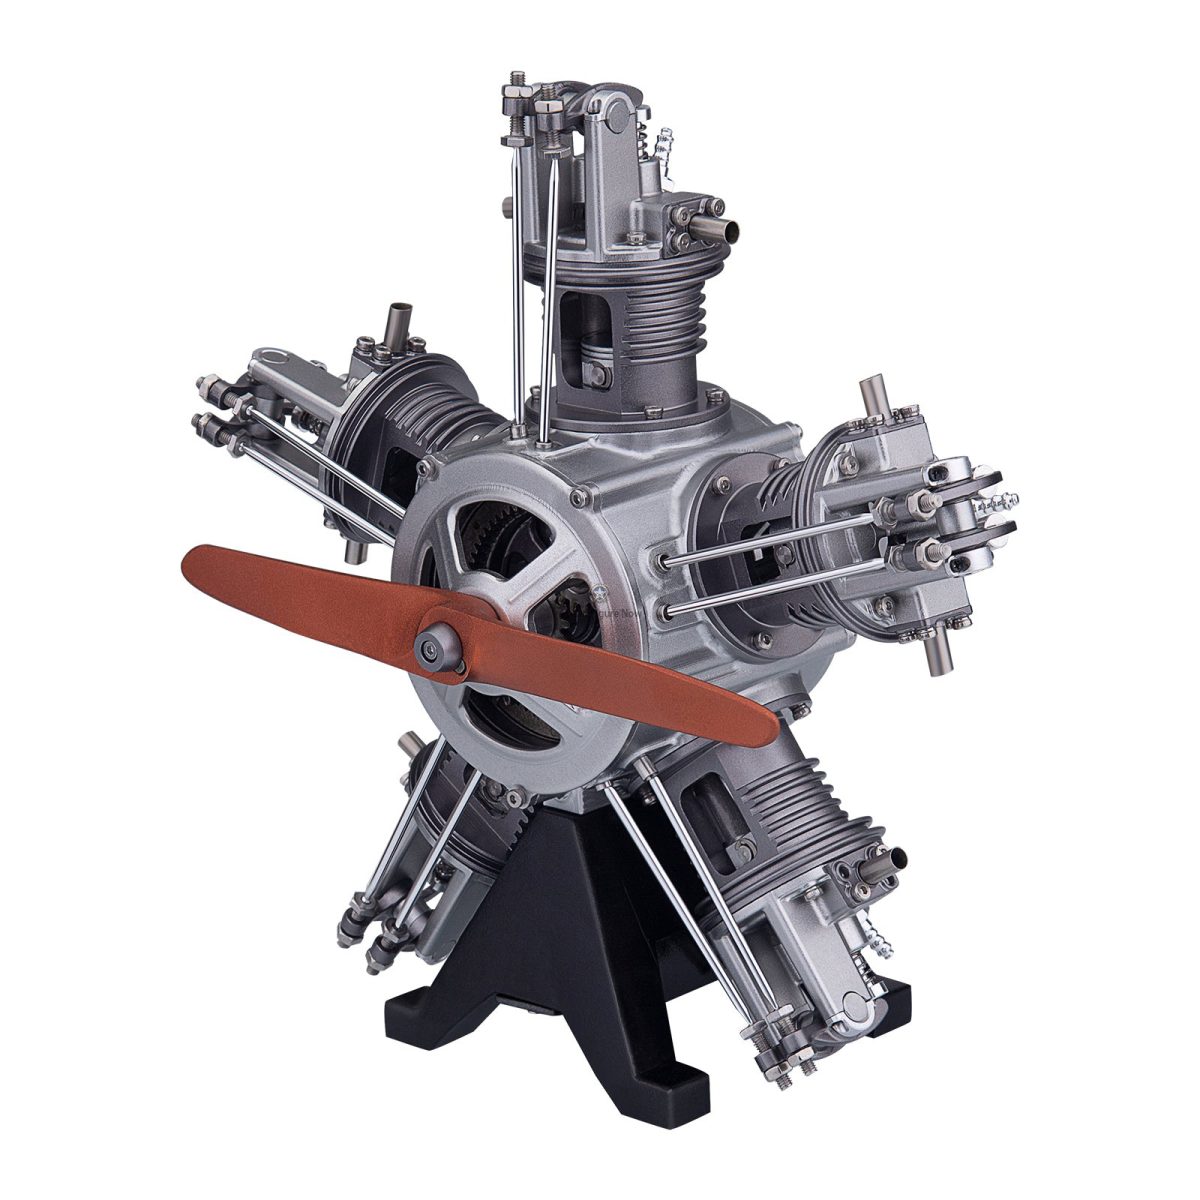 5-Cylinder Radial Engine Model Kit (Working Model) - 1:6 Scale Metal Assembly with 250+ Pieces